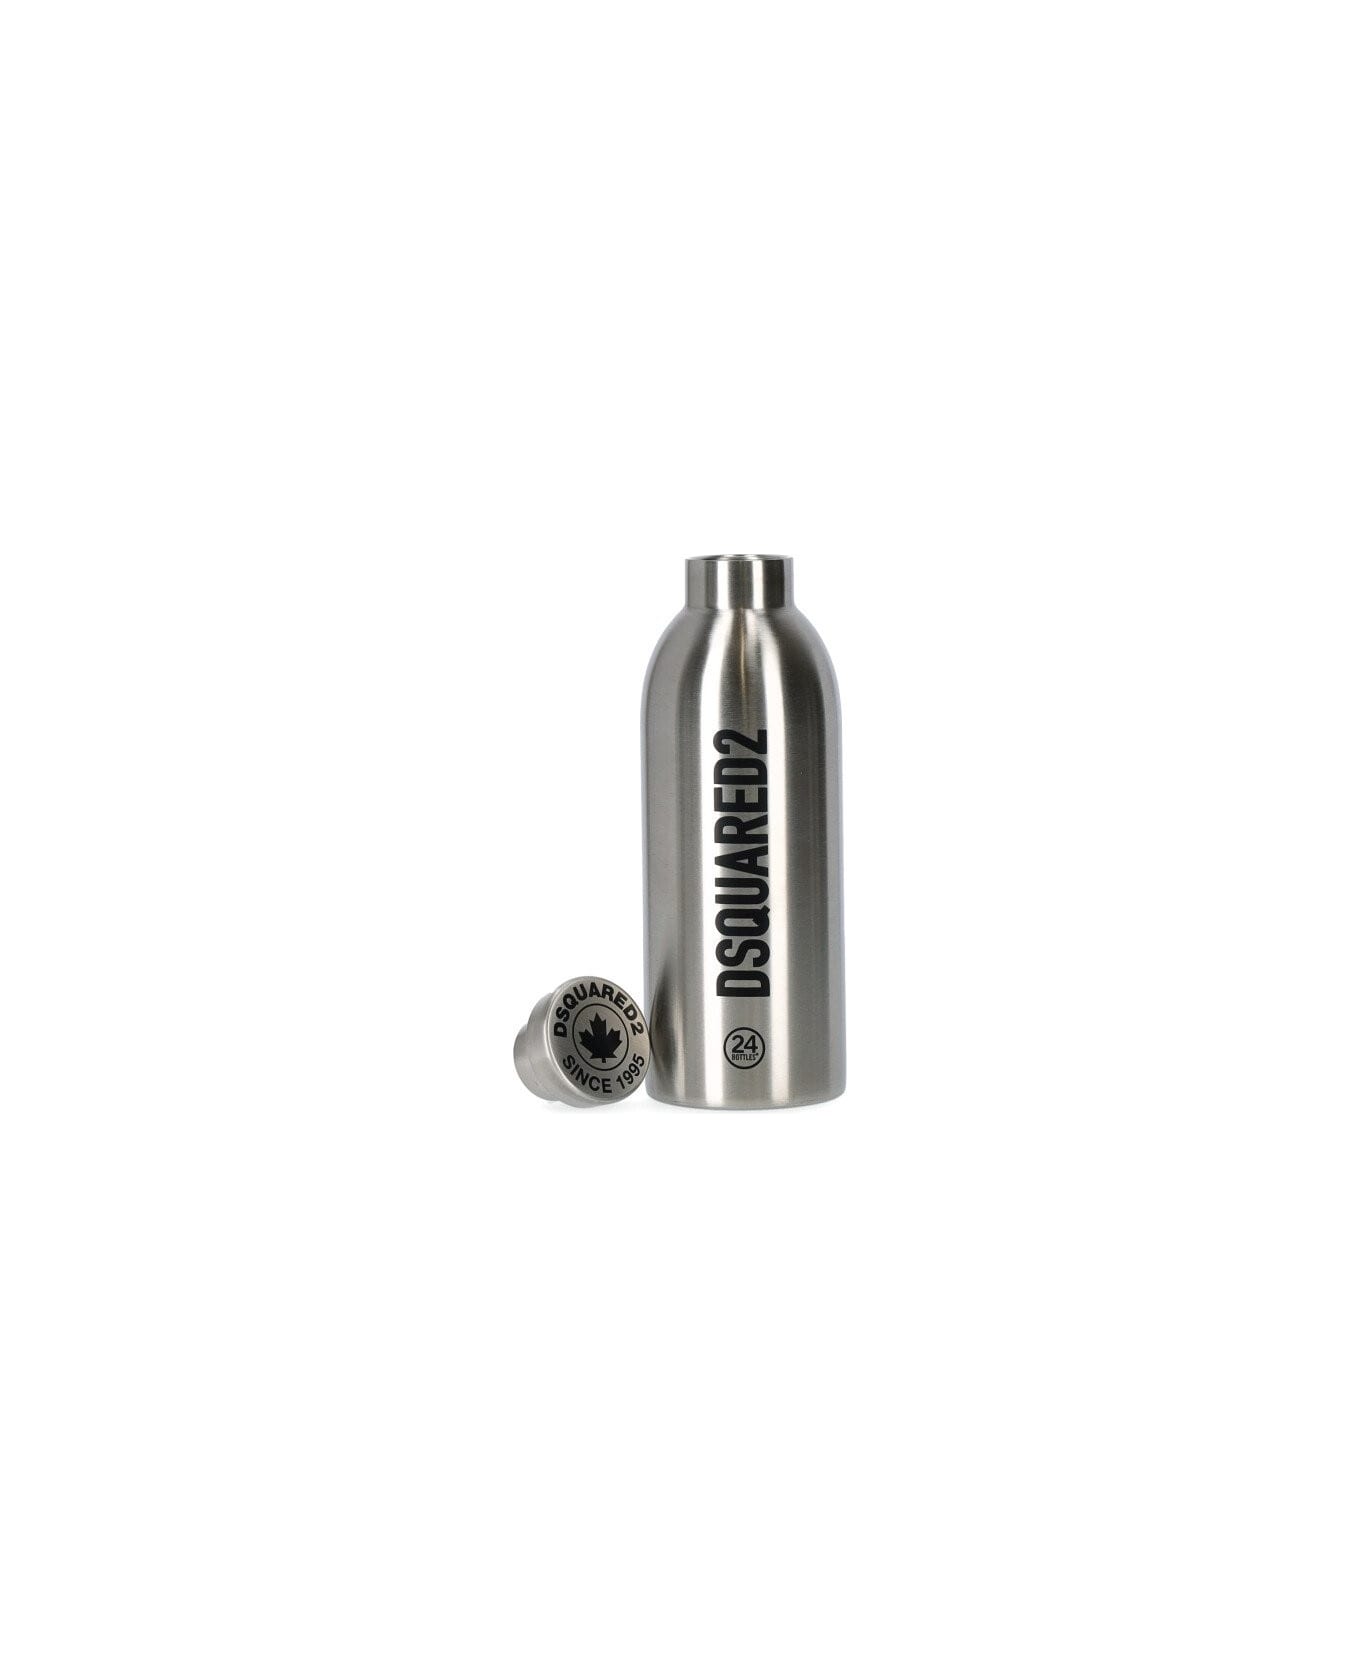 Dsquared2 Travel Lite Silver Water Bottle - Argento